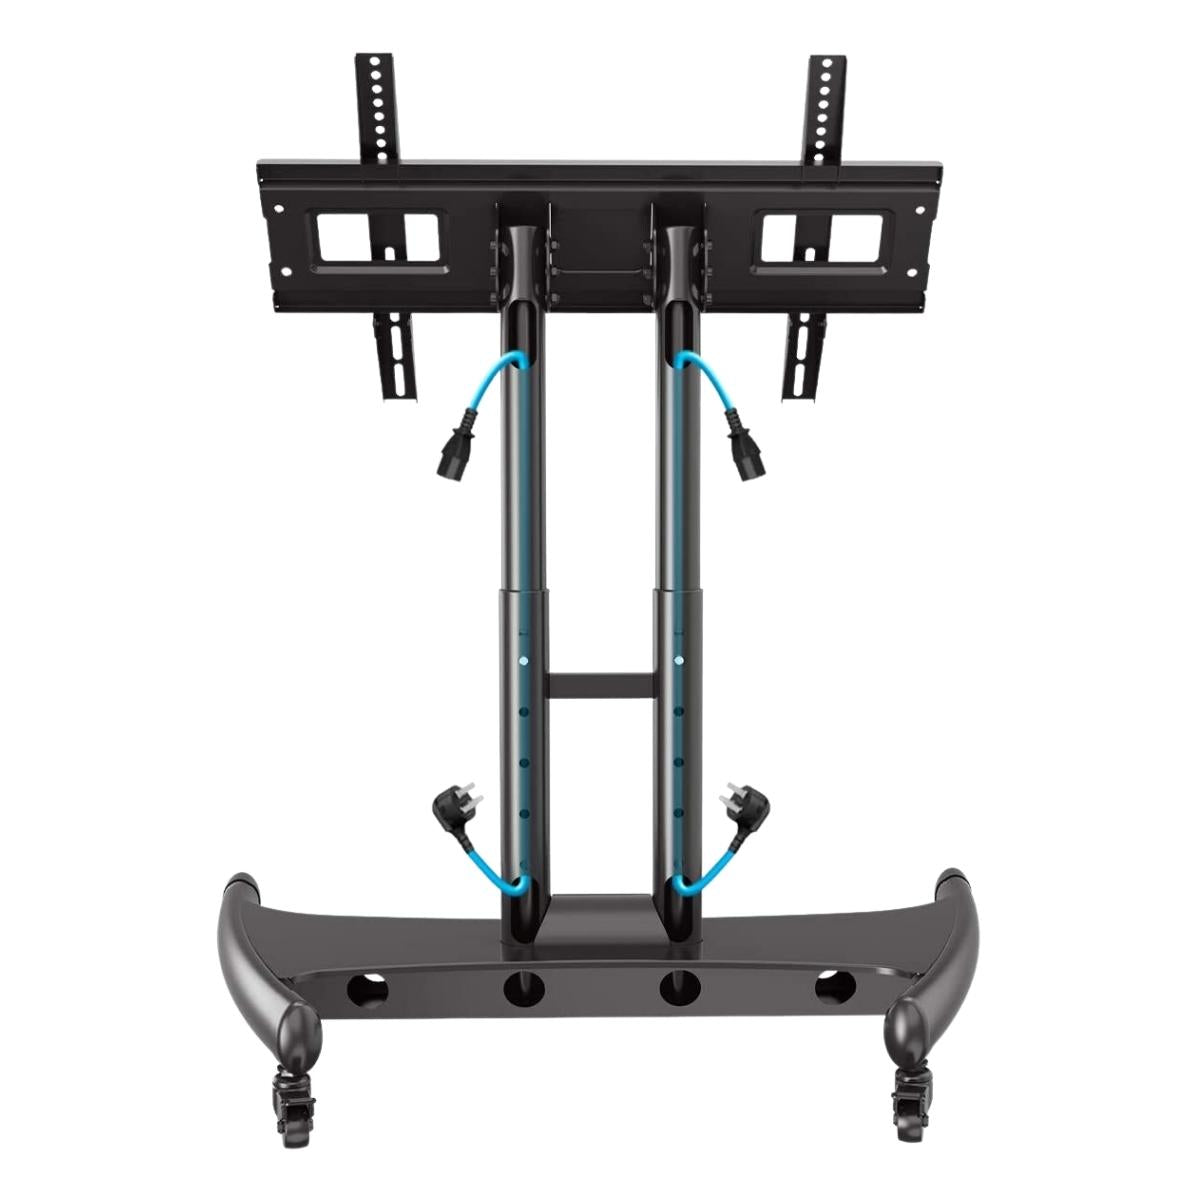 NB North Bayou AVA50 32"- 70" with 45kg Max Payload and 90 Degree Tilting  TV Mobile Cart Stand with Wheels with Reduced Height and Cable Management System for LCD LED Flat Screen TV Television